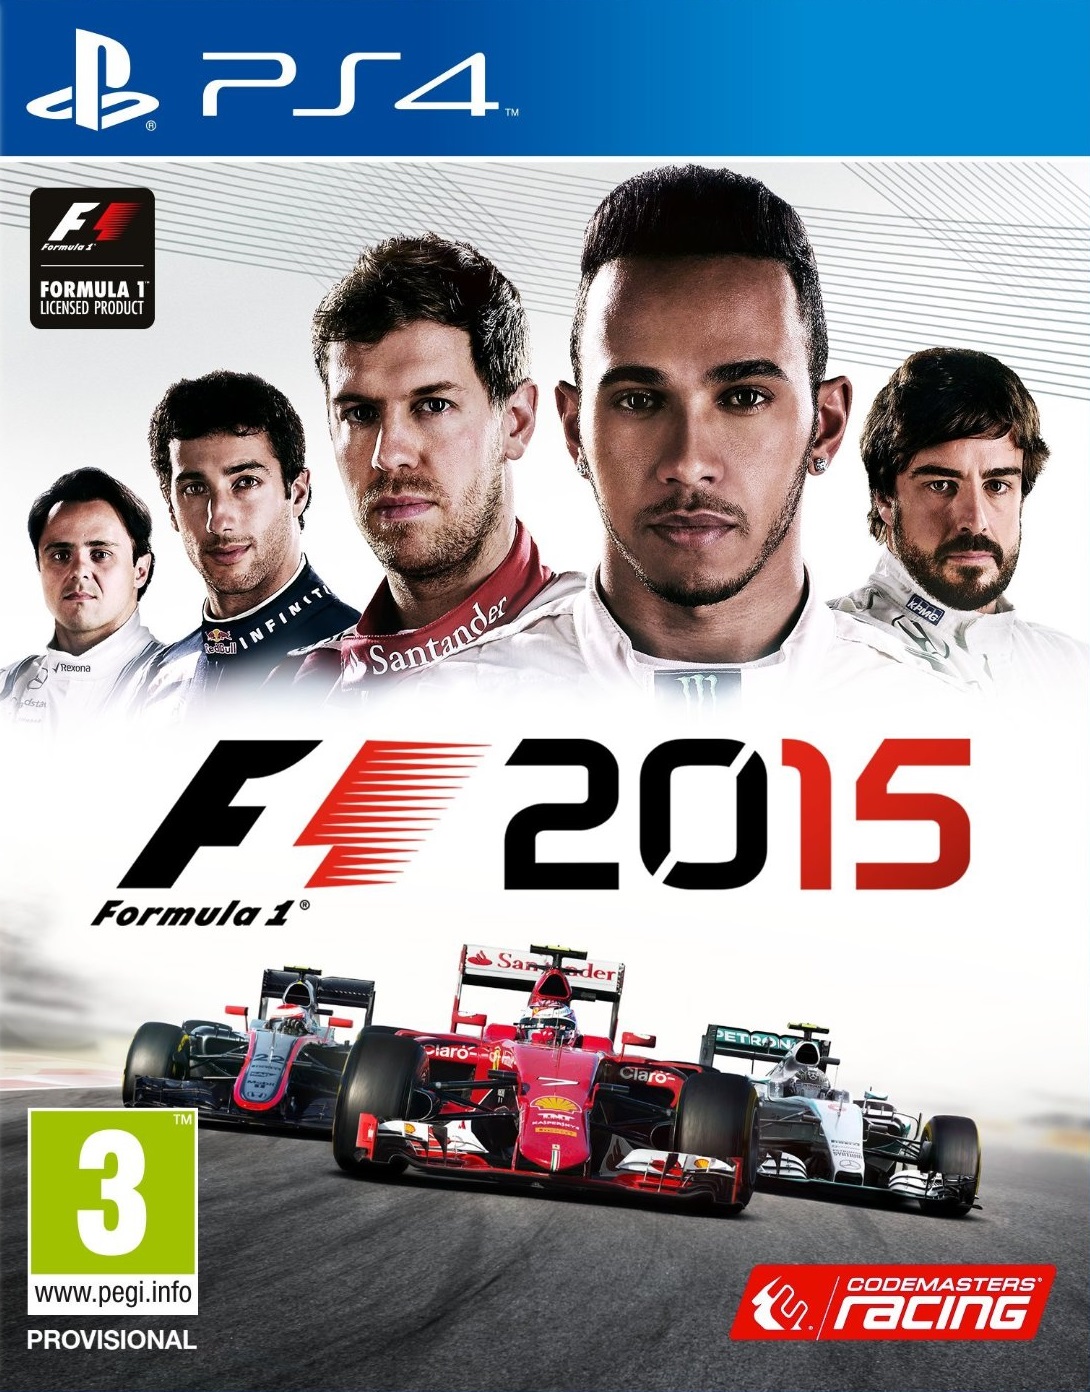 bus kromme Wolkenkrabber NEW This Week: F1 2015: Formula 1 and more on PS4, Xbox One, PS3, 3DS and  PC!